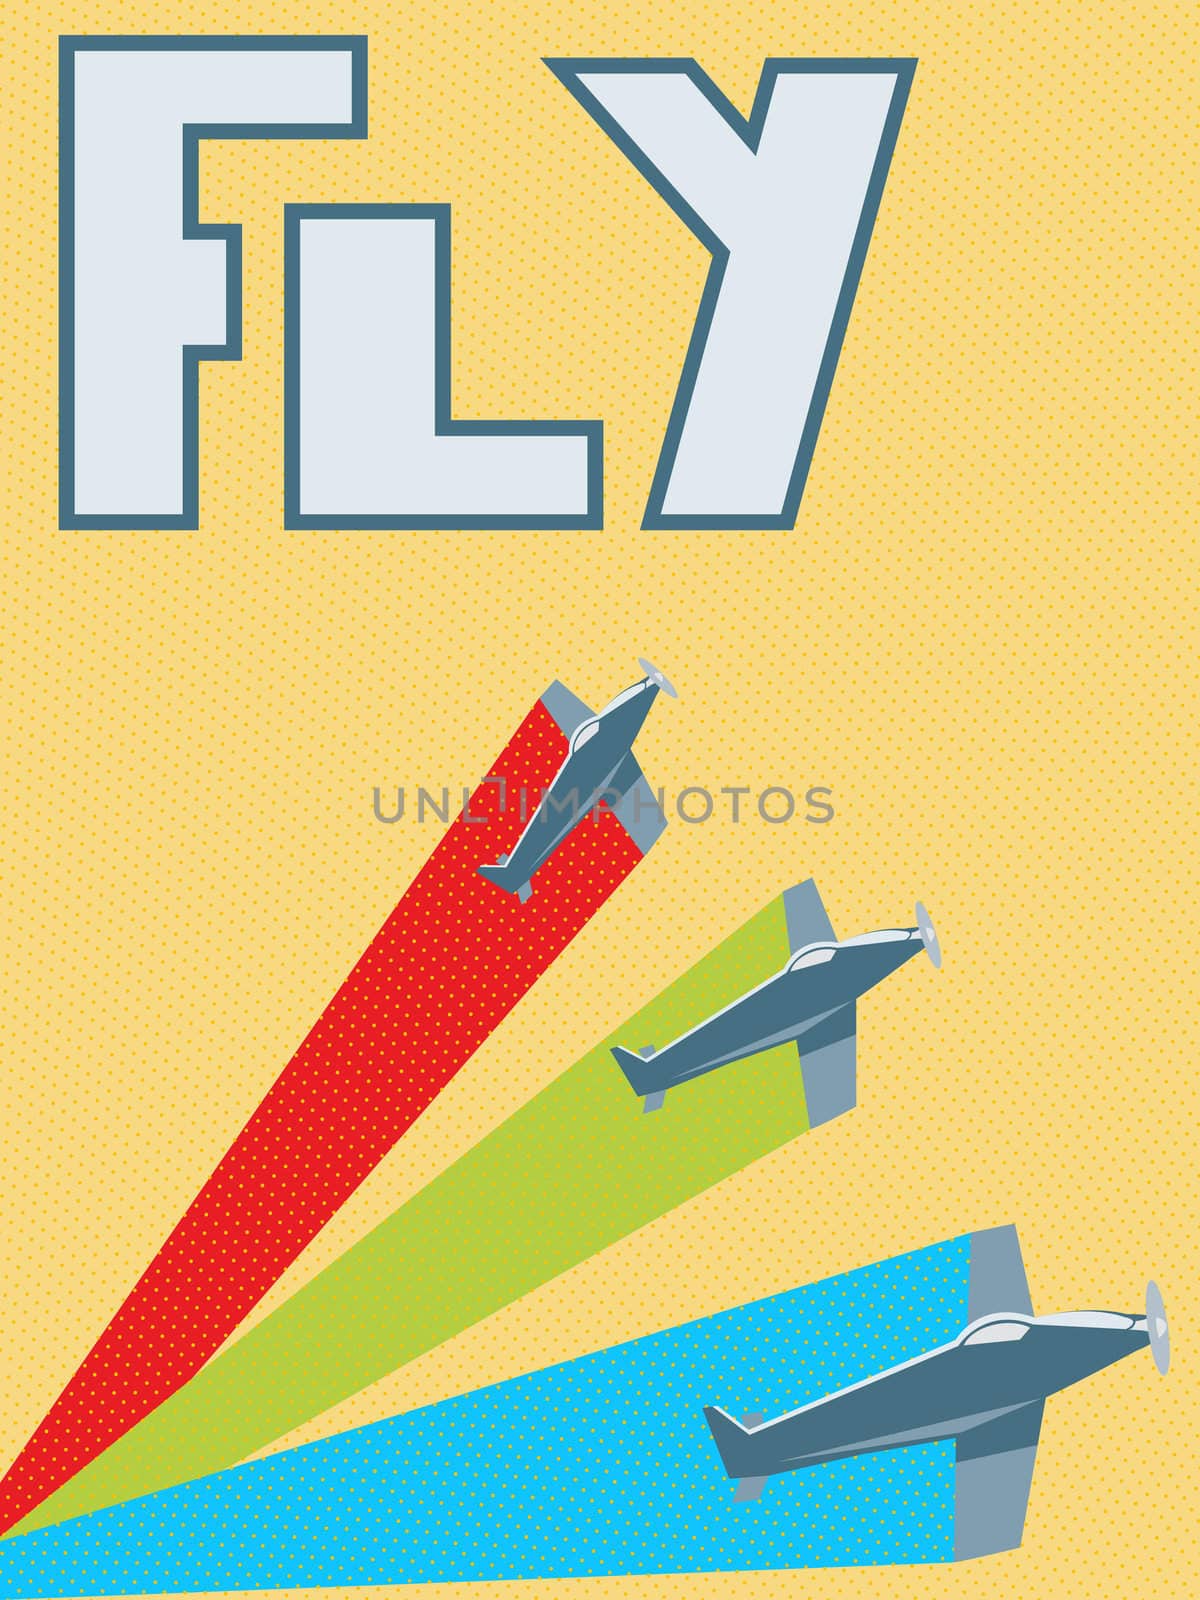 Retro fly poster by Lirch